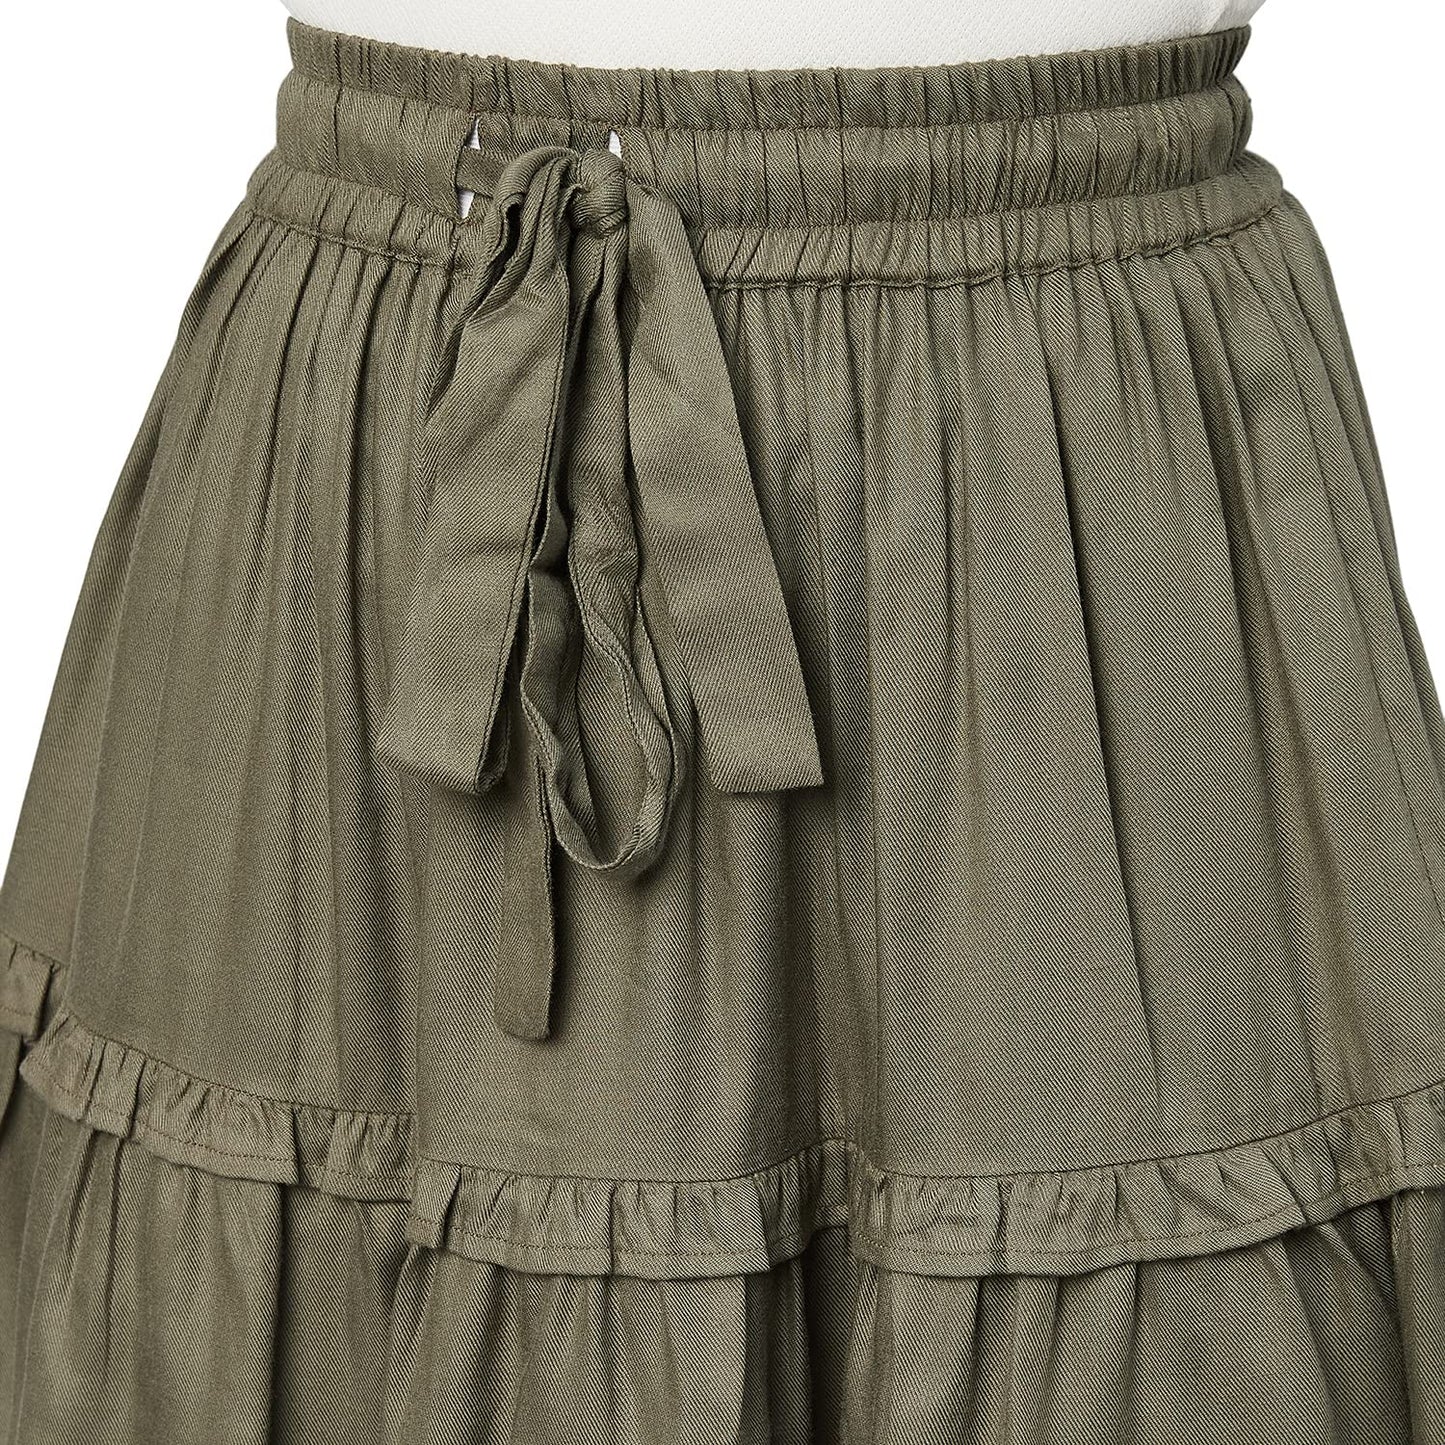 Marie Claire Rayon Western Skirt Olive Green